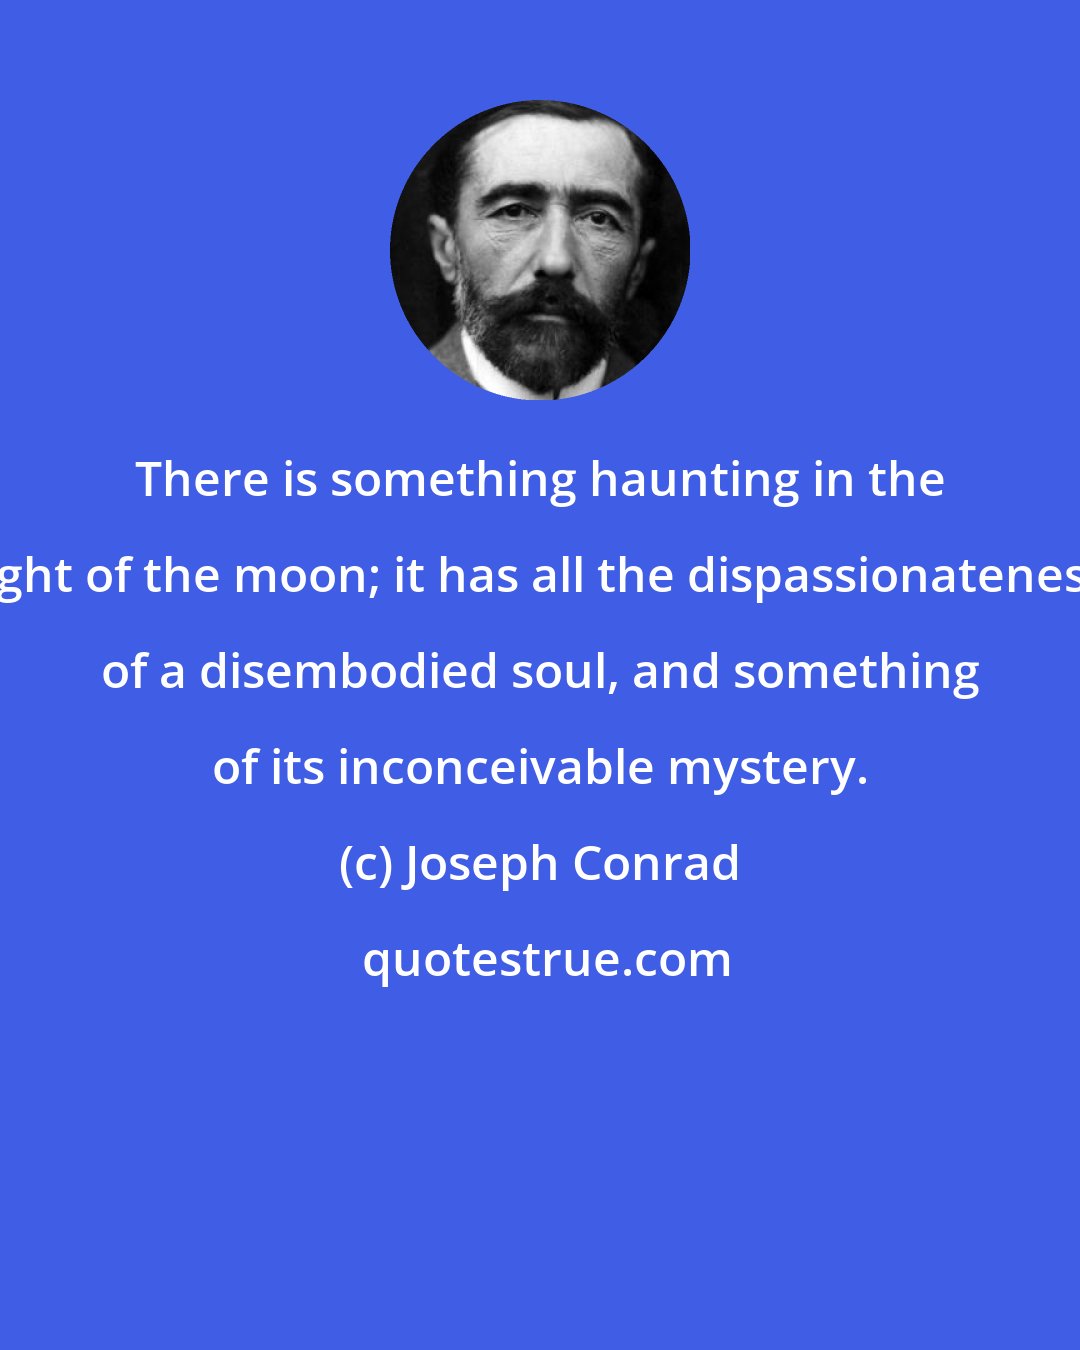 Joseph Conrad: There is something haunting in the light of the moon; it has all the dispassionateness of a disembodied soul, and something of its inconceivable mystery.